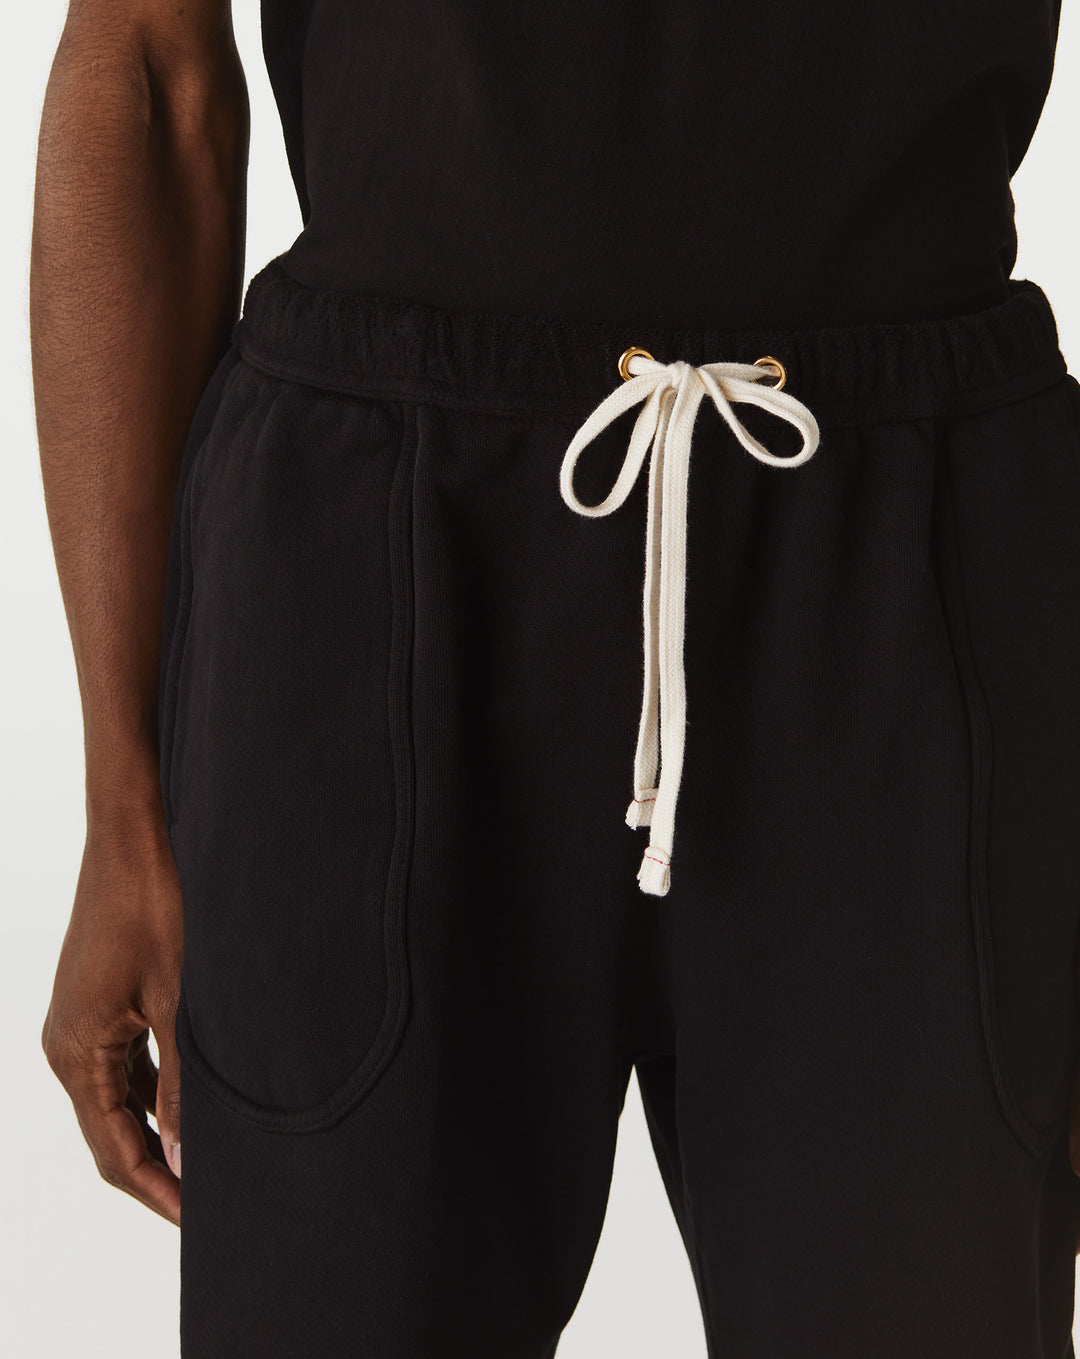 Elasticated waist with drawstring